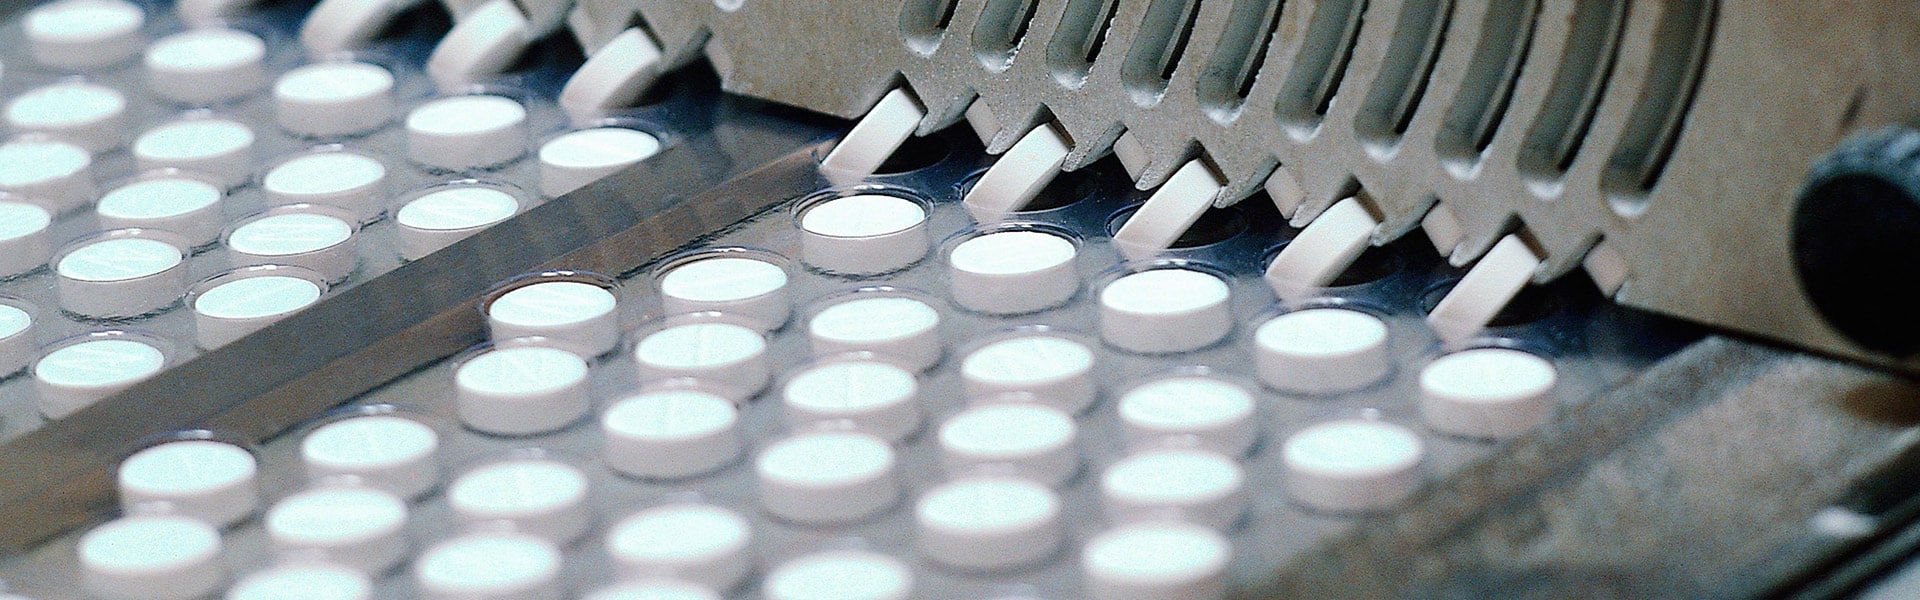 SAP Completes Pharmaceutical Industry Pilot to Improve Supply Chain Authenticity